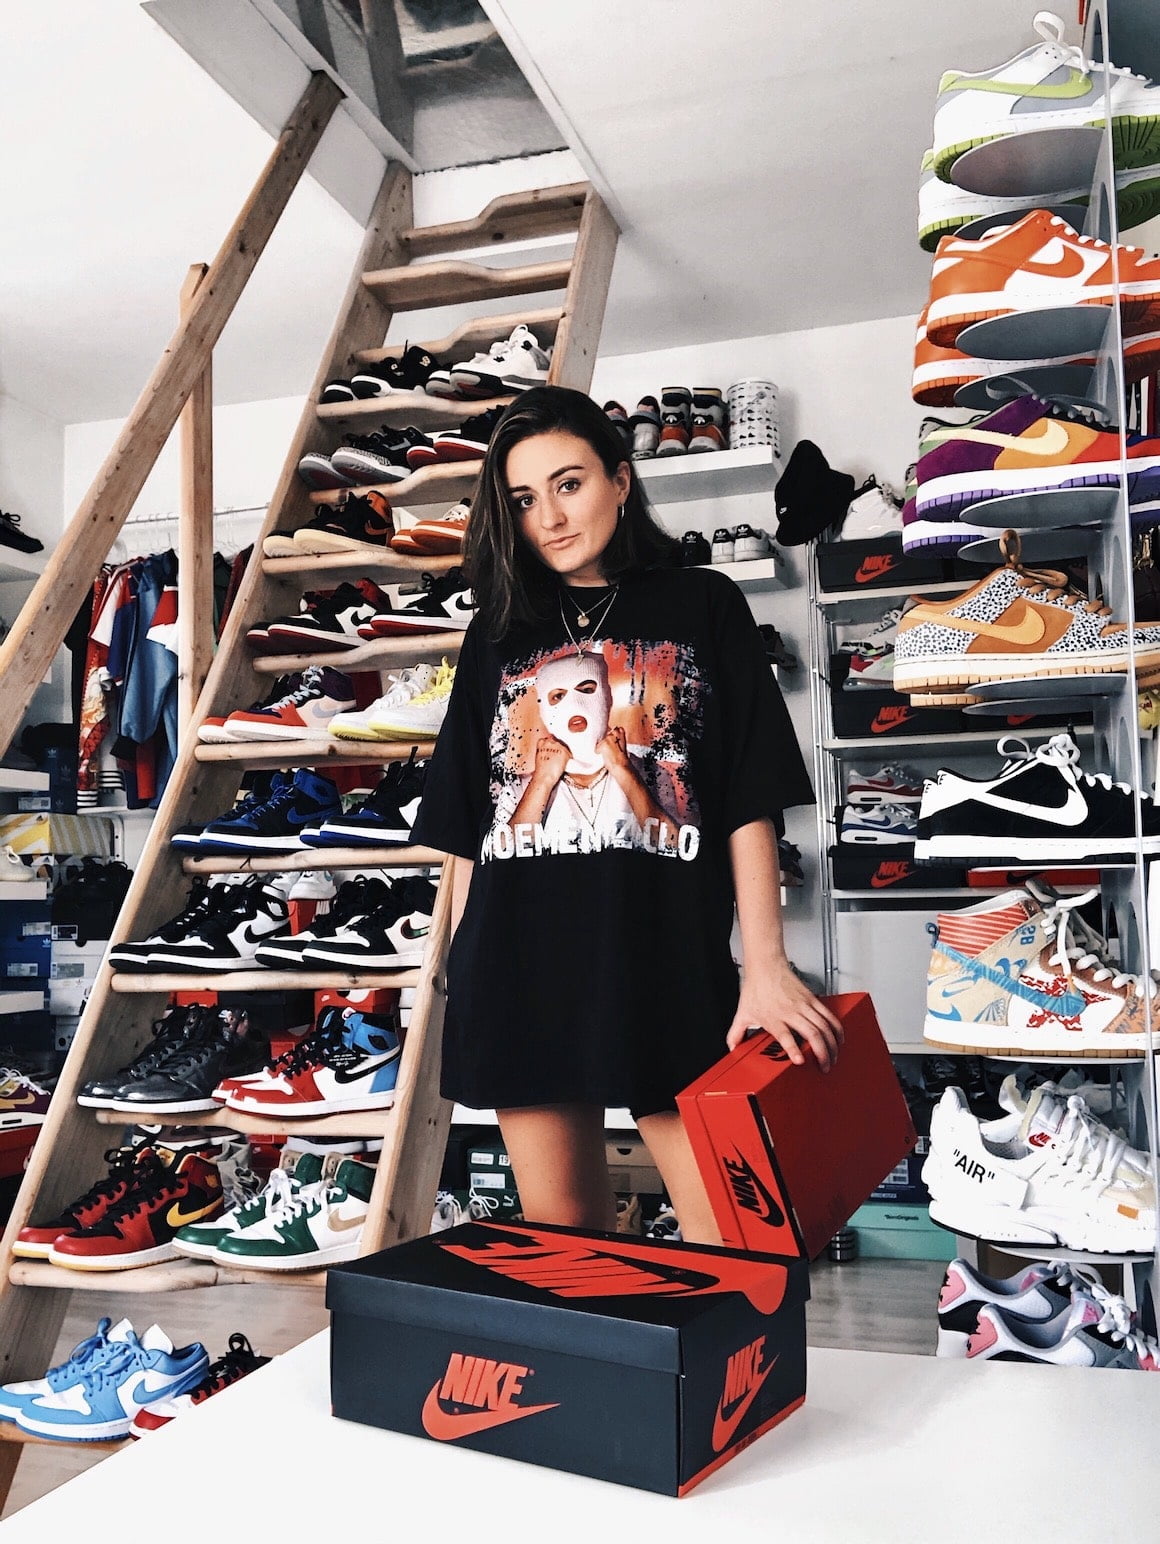 10 Celebrities You Probably Didn't Know Liked Supreme - KLEKT Blog